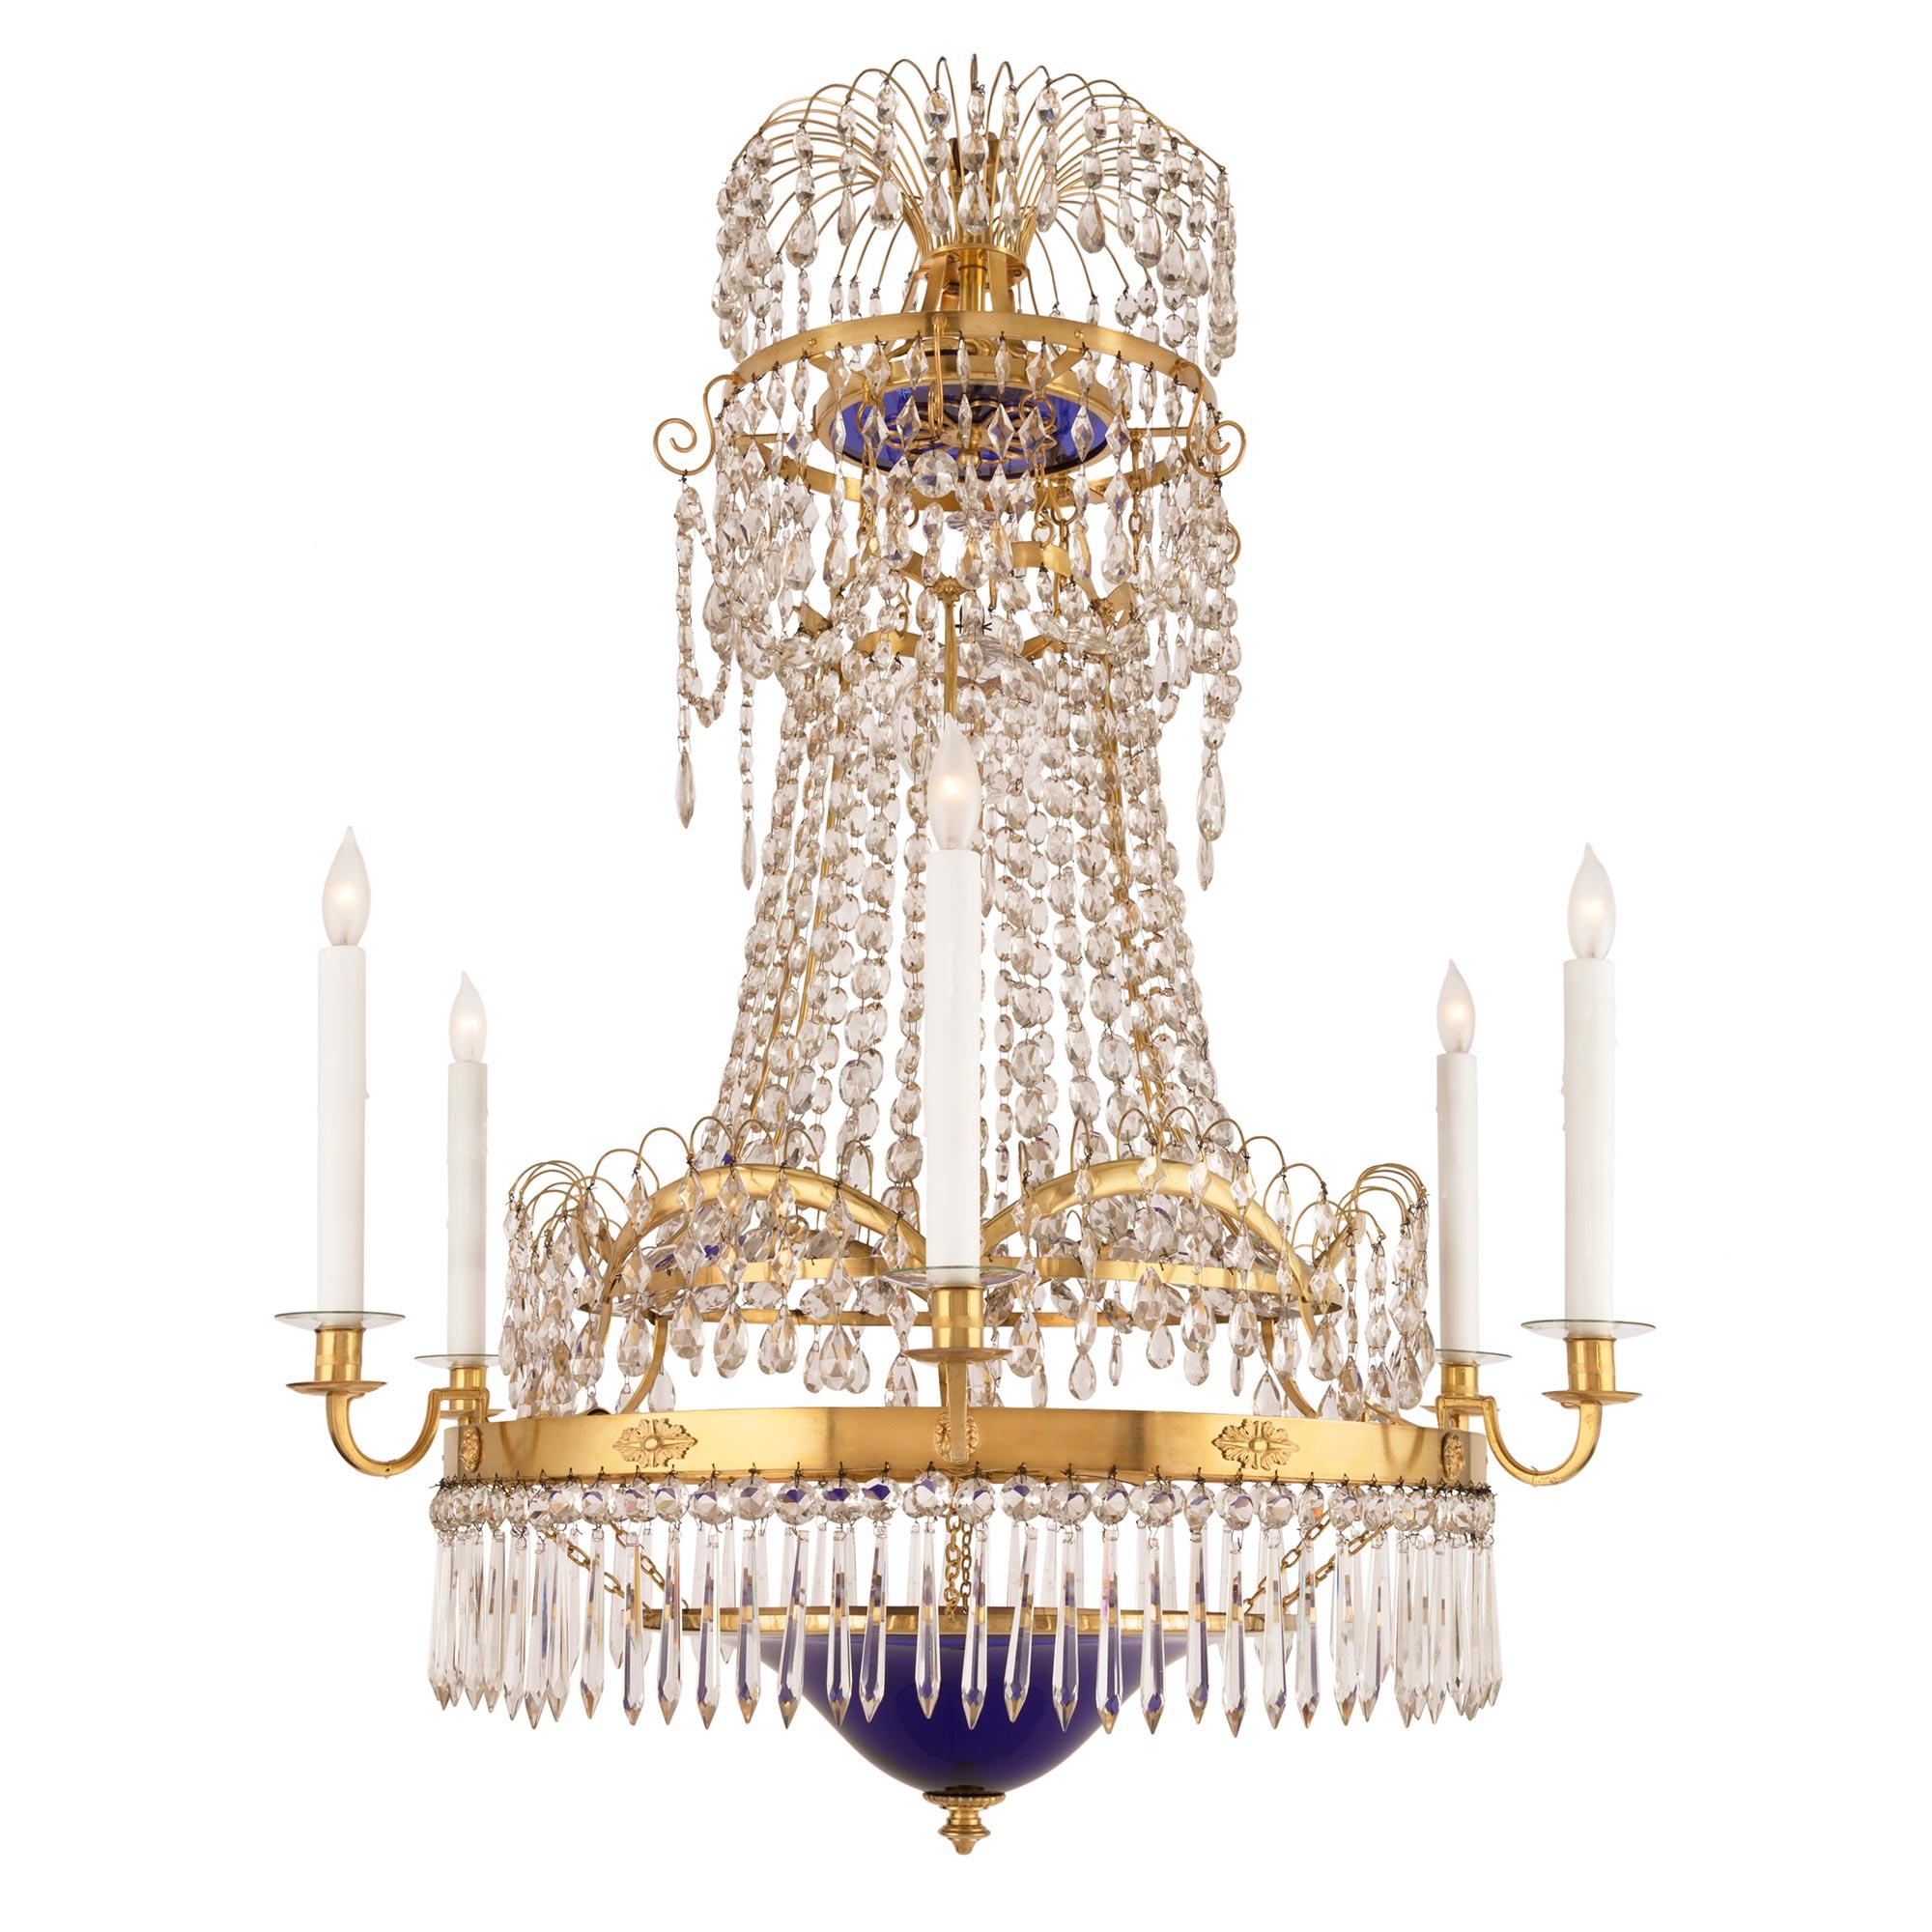 Baltic 18th Century Neoclassical Style Ormolu, Crystal and Chandelier In Good Condition For Sale In West Palm Beach, FL